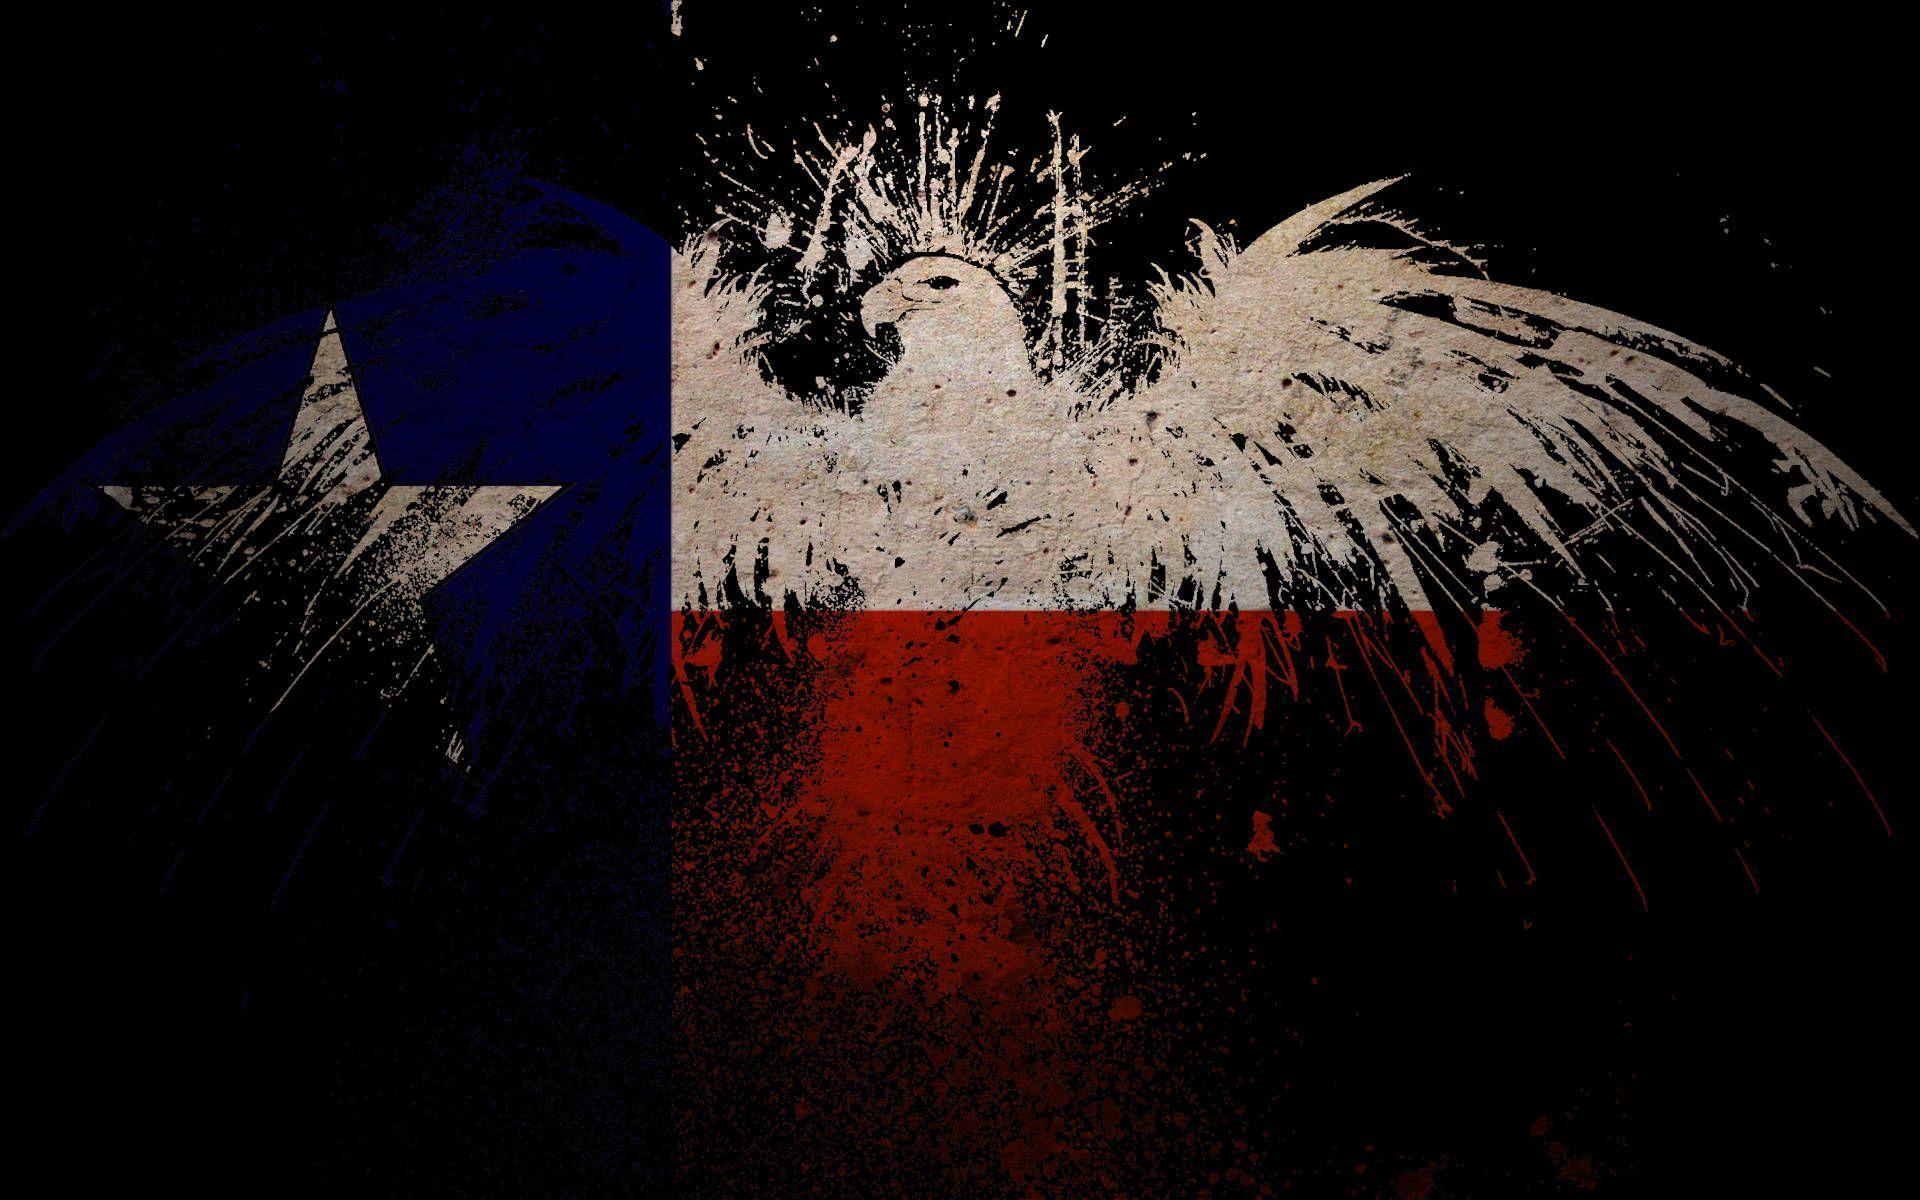 Free Texas Flag Wallpaper, HDQ Texas Flag Image Collection for.